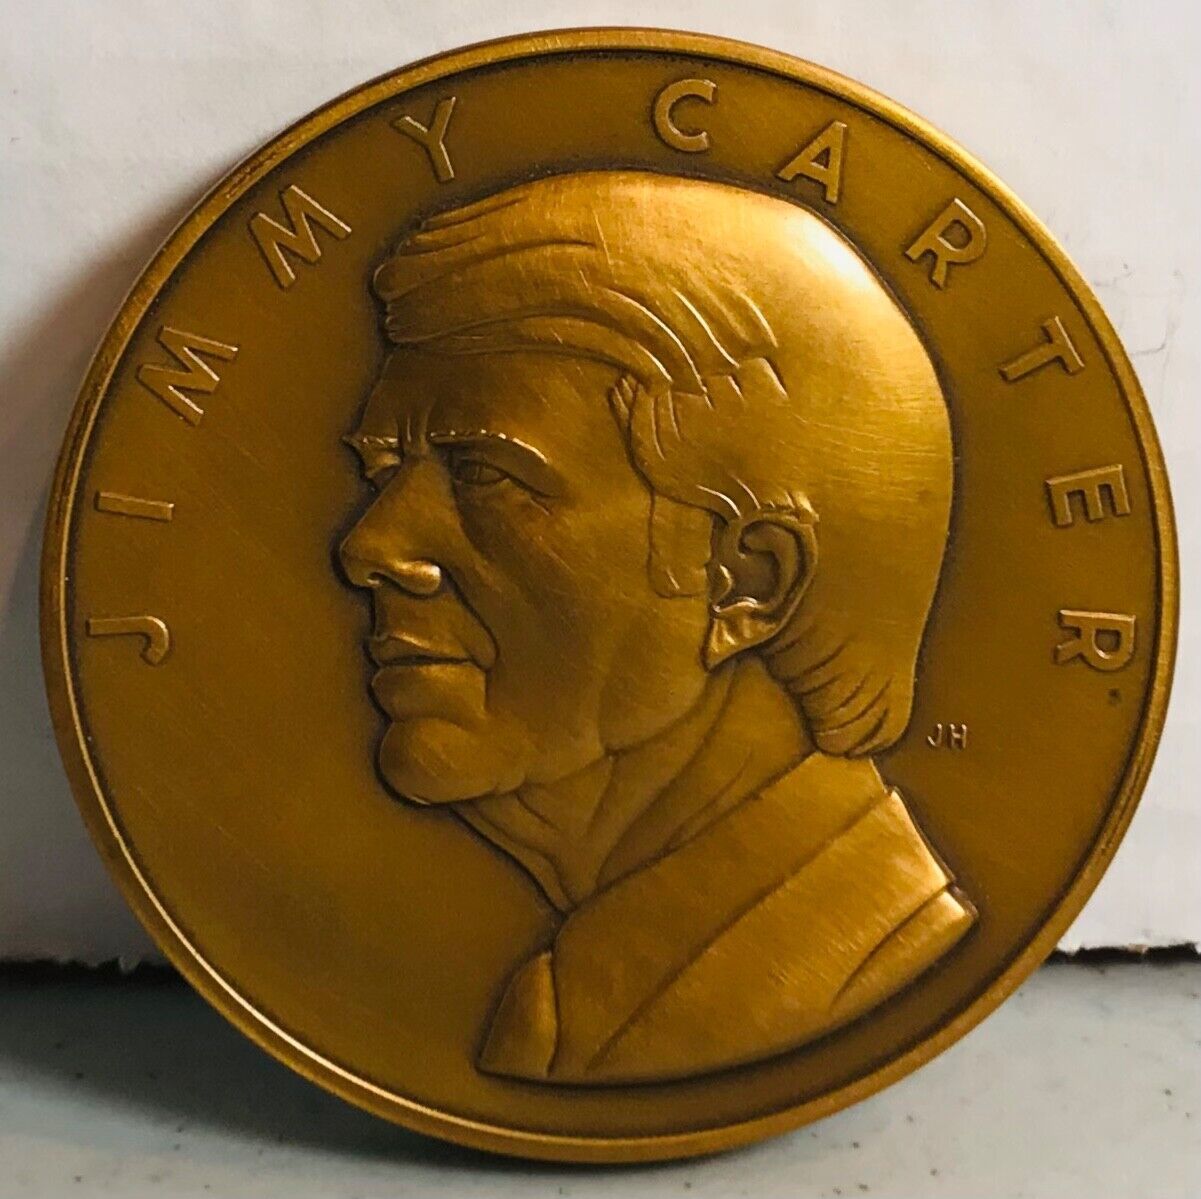 Primary image for Jimmy Carter 1977 PRESIDENTIAL INAUGURAL Medal SOLID BRONZE Franklin Mint